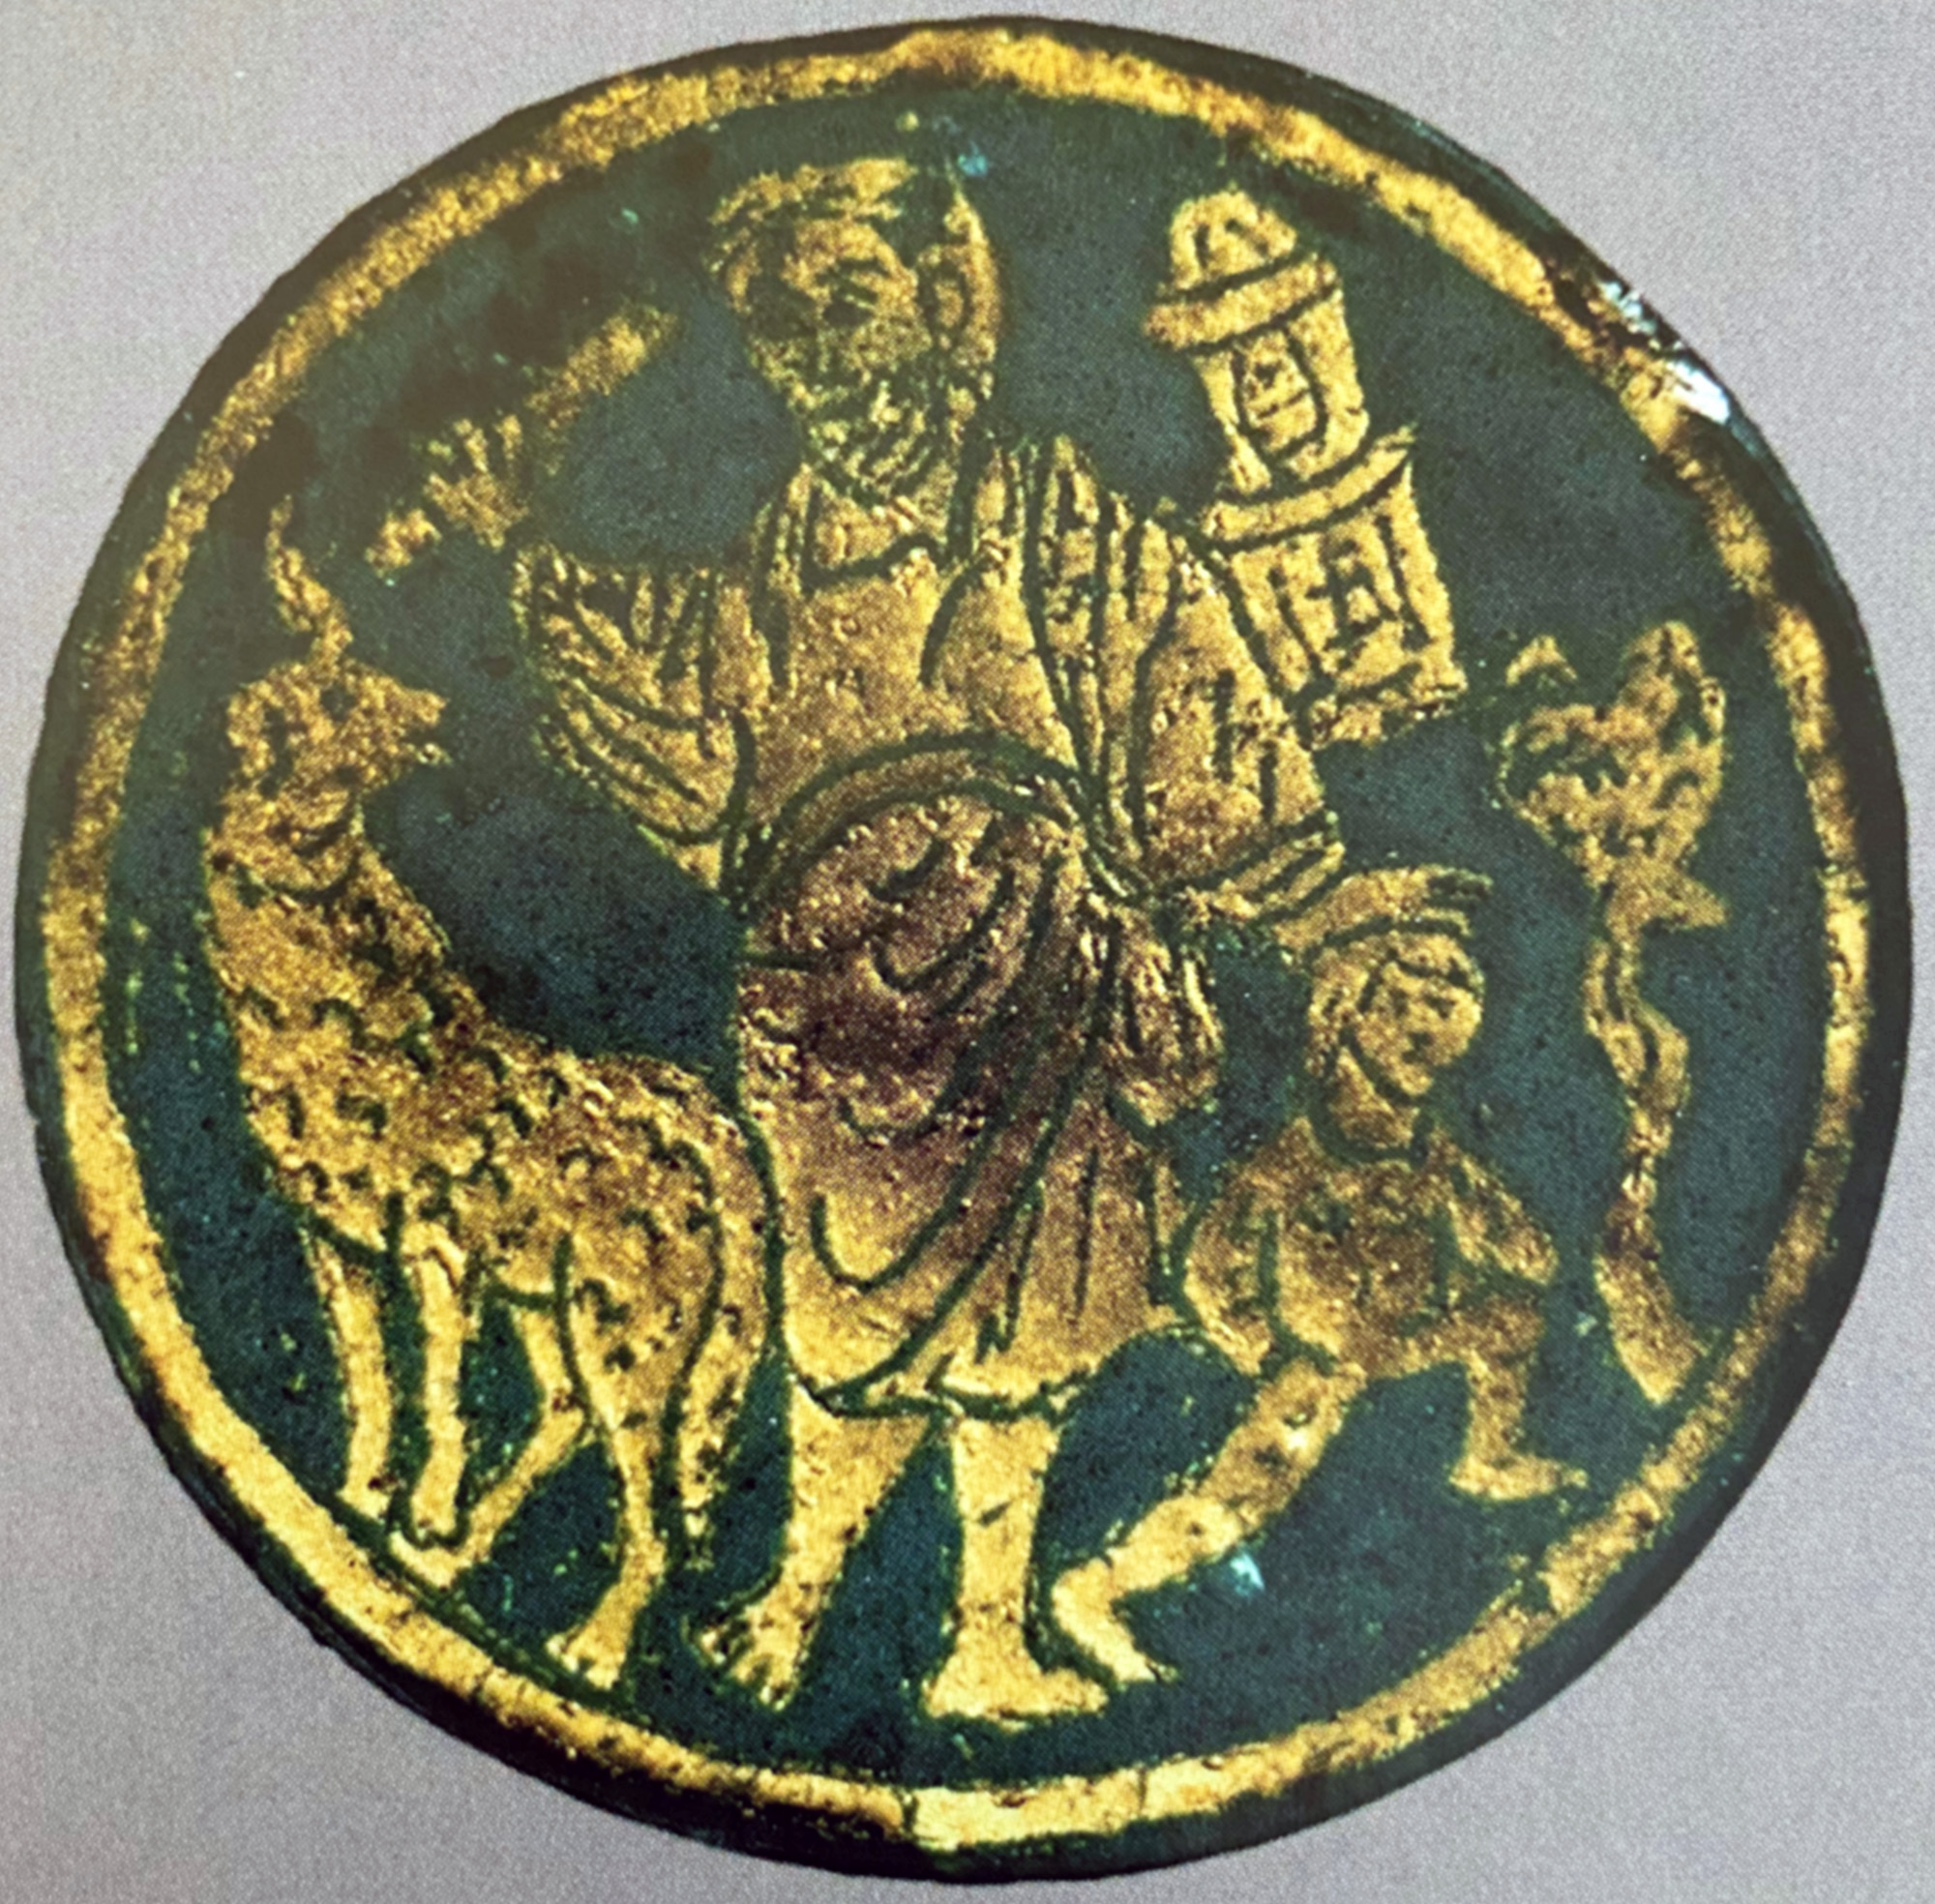 On a piece of gold glass, a figure wearing a tunic standing between a ram and a small, nude figure.